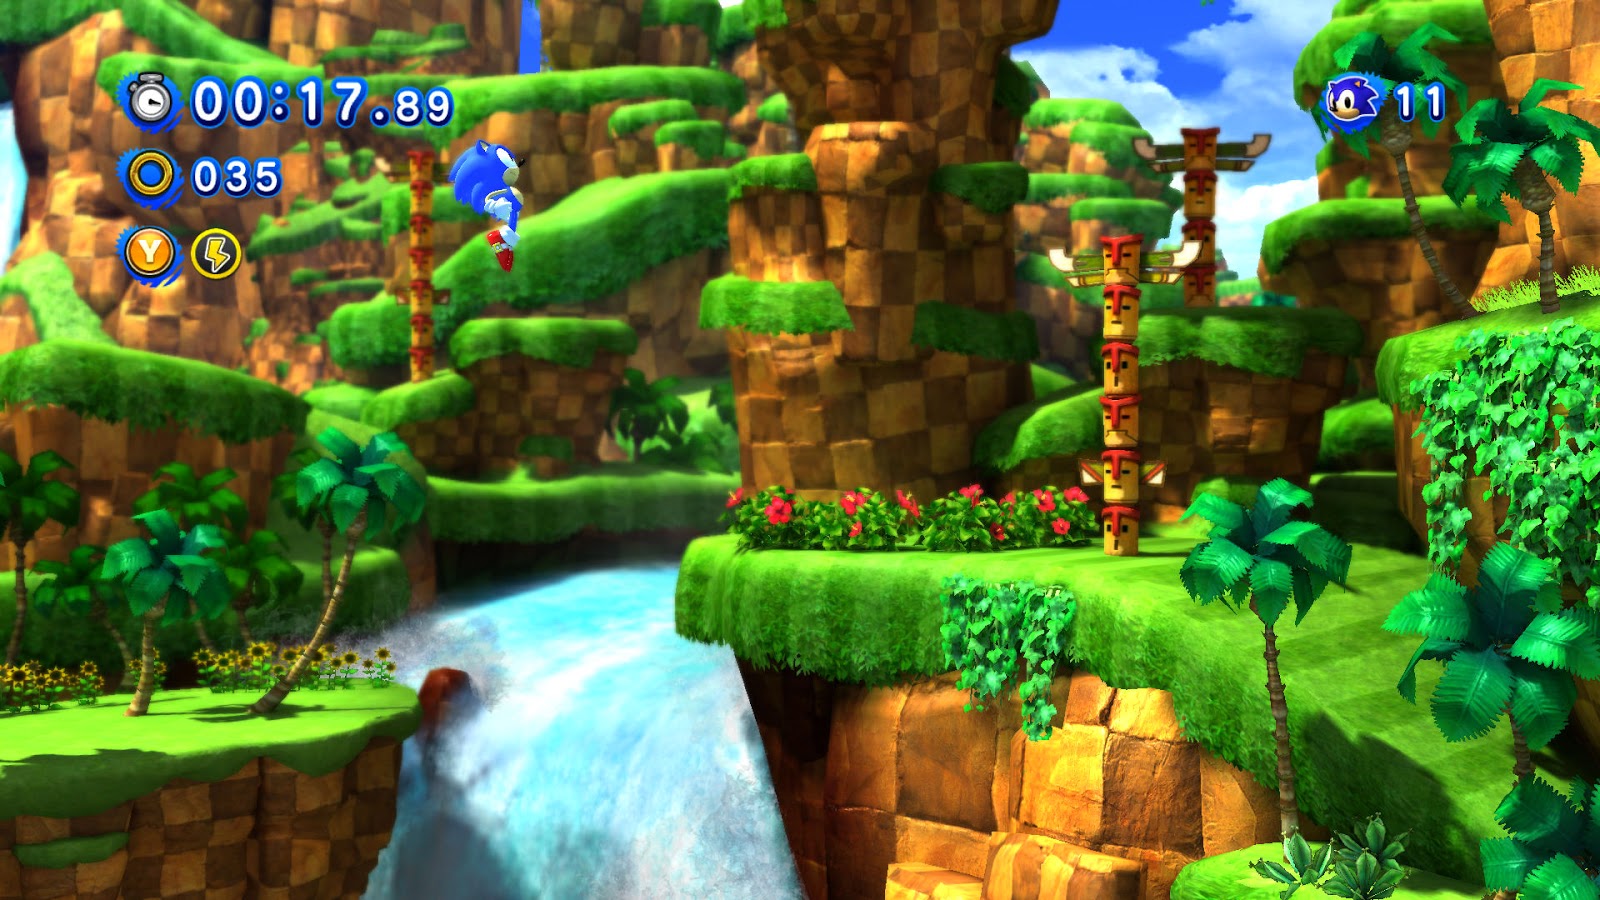 sonic generations free download pc